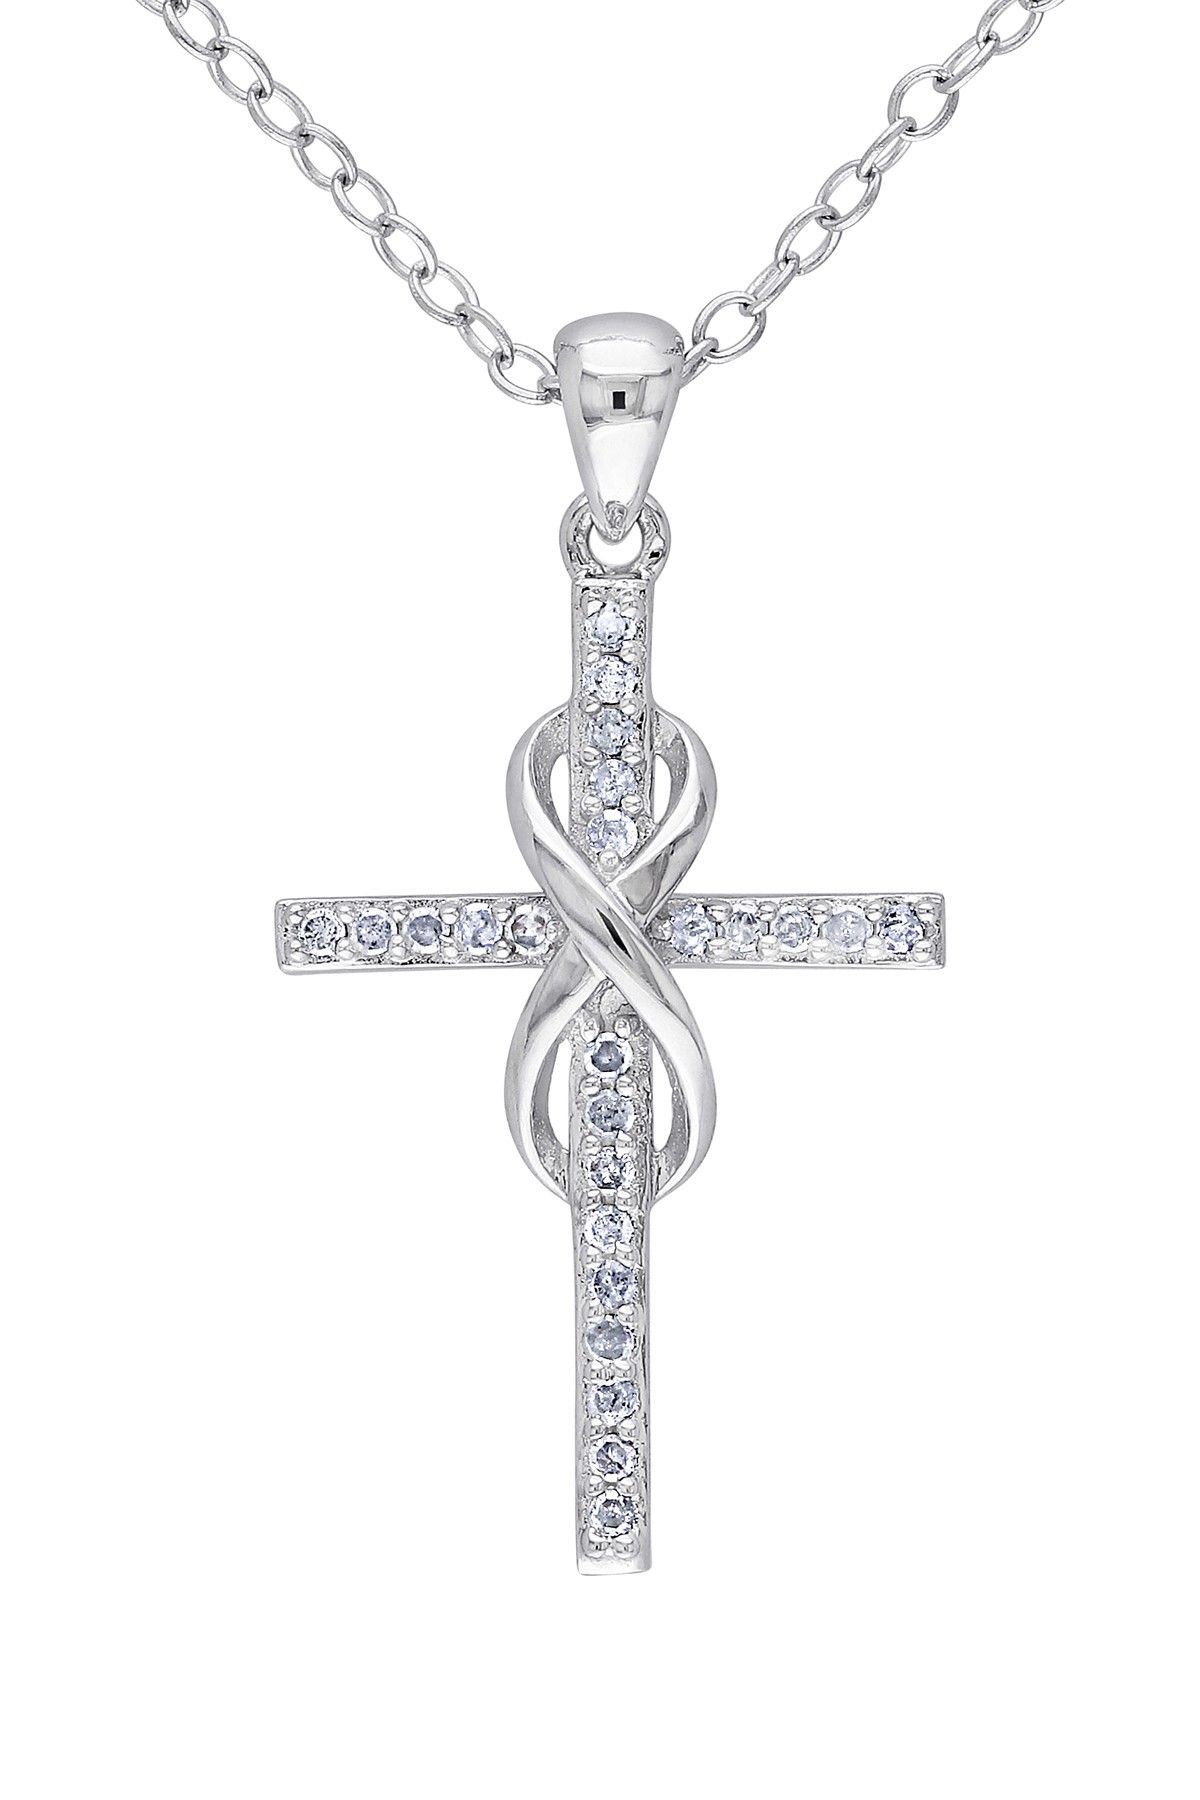 Sterling Silver Diamond Wrapped Cross Pendant Necklace – 0.10 ctw on HauteLook